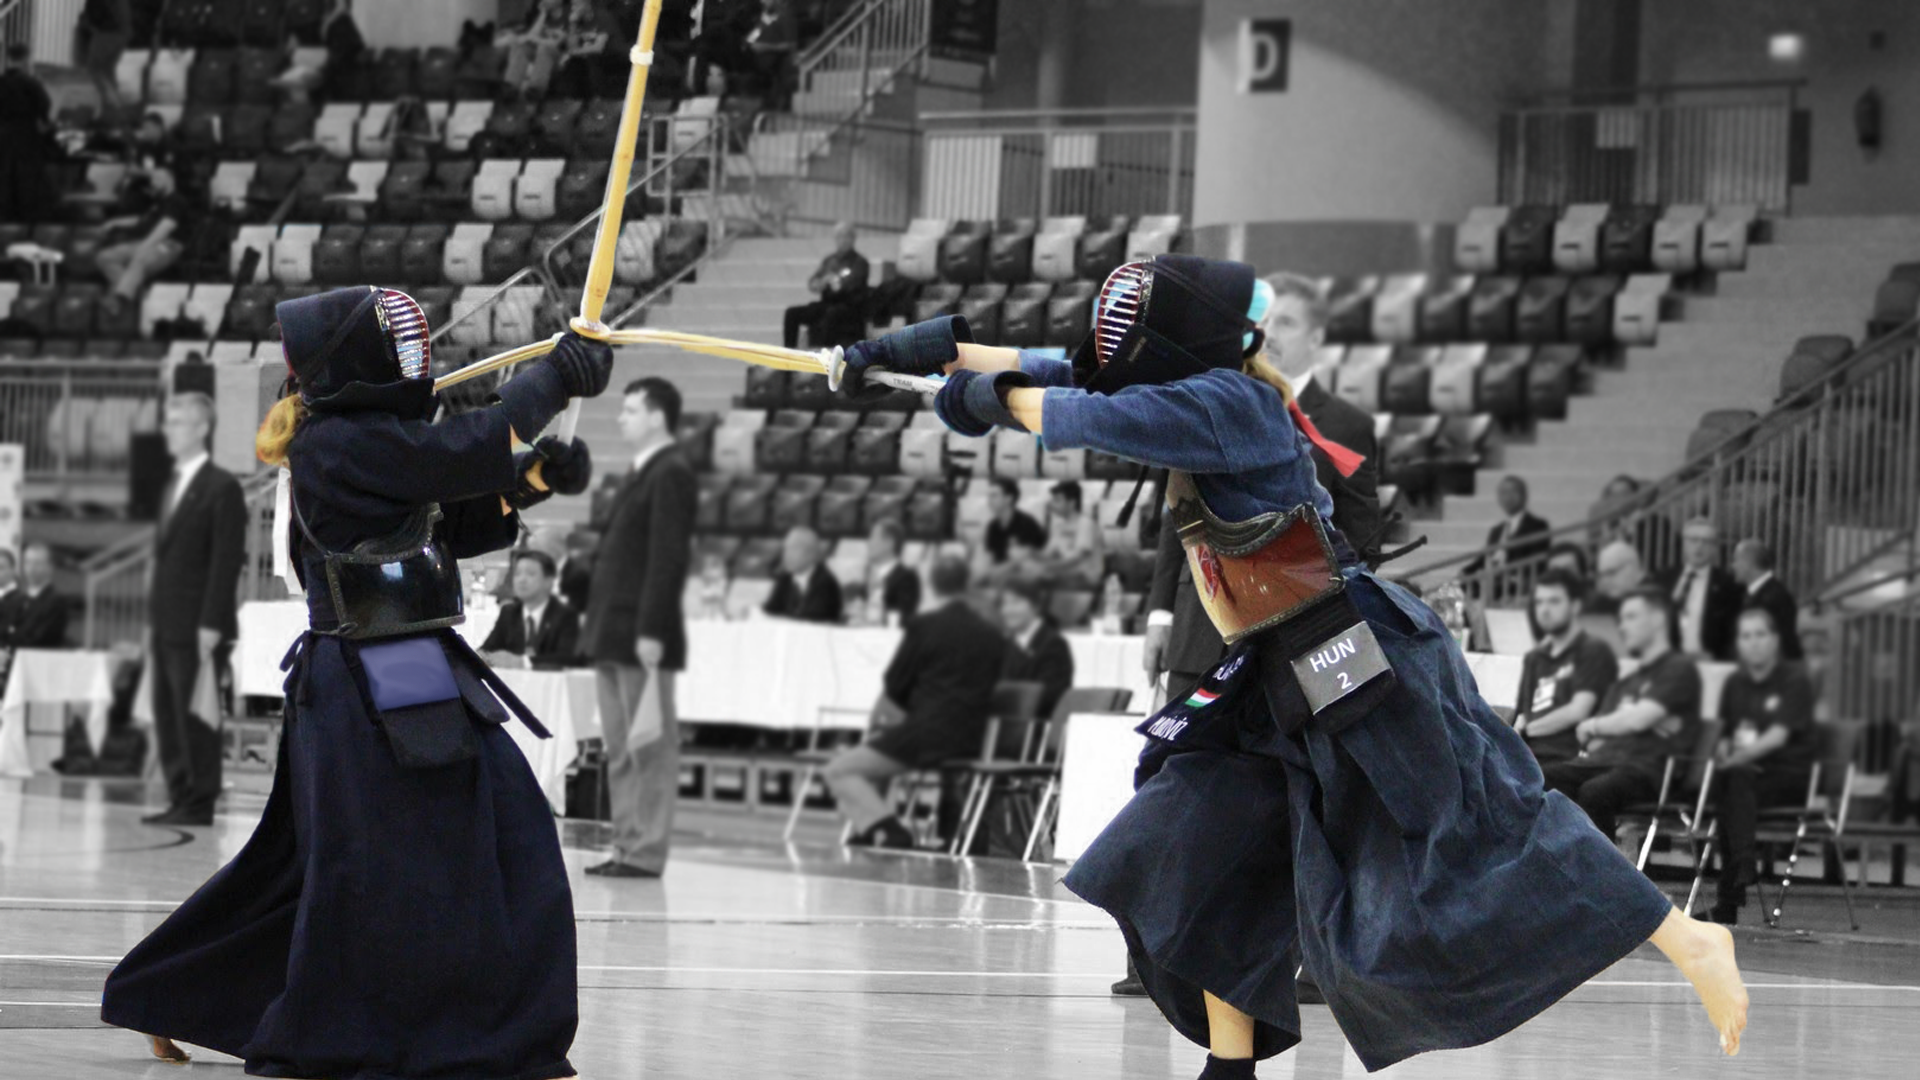 ABOUT KENDO...